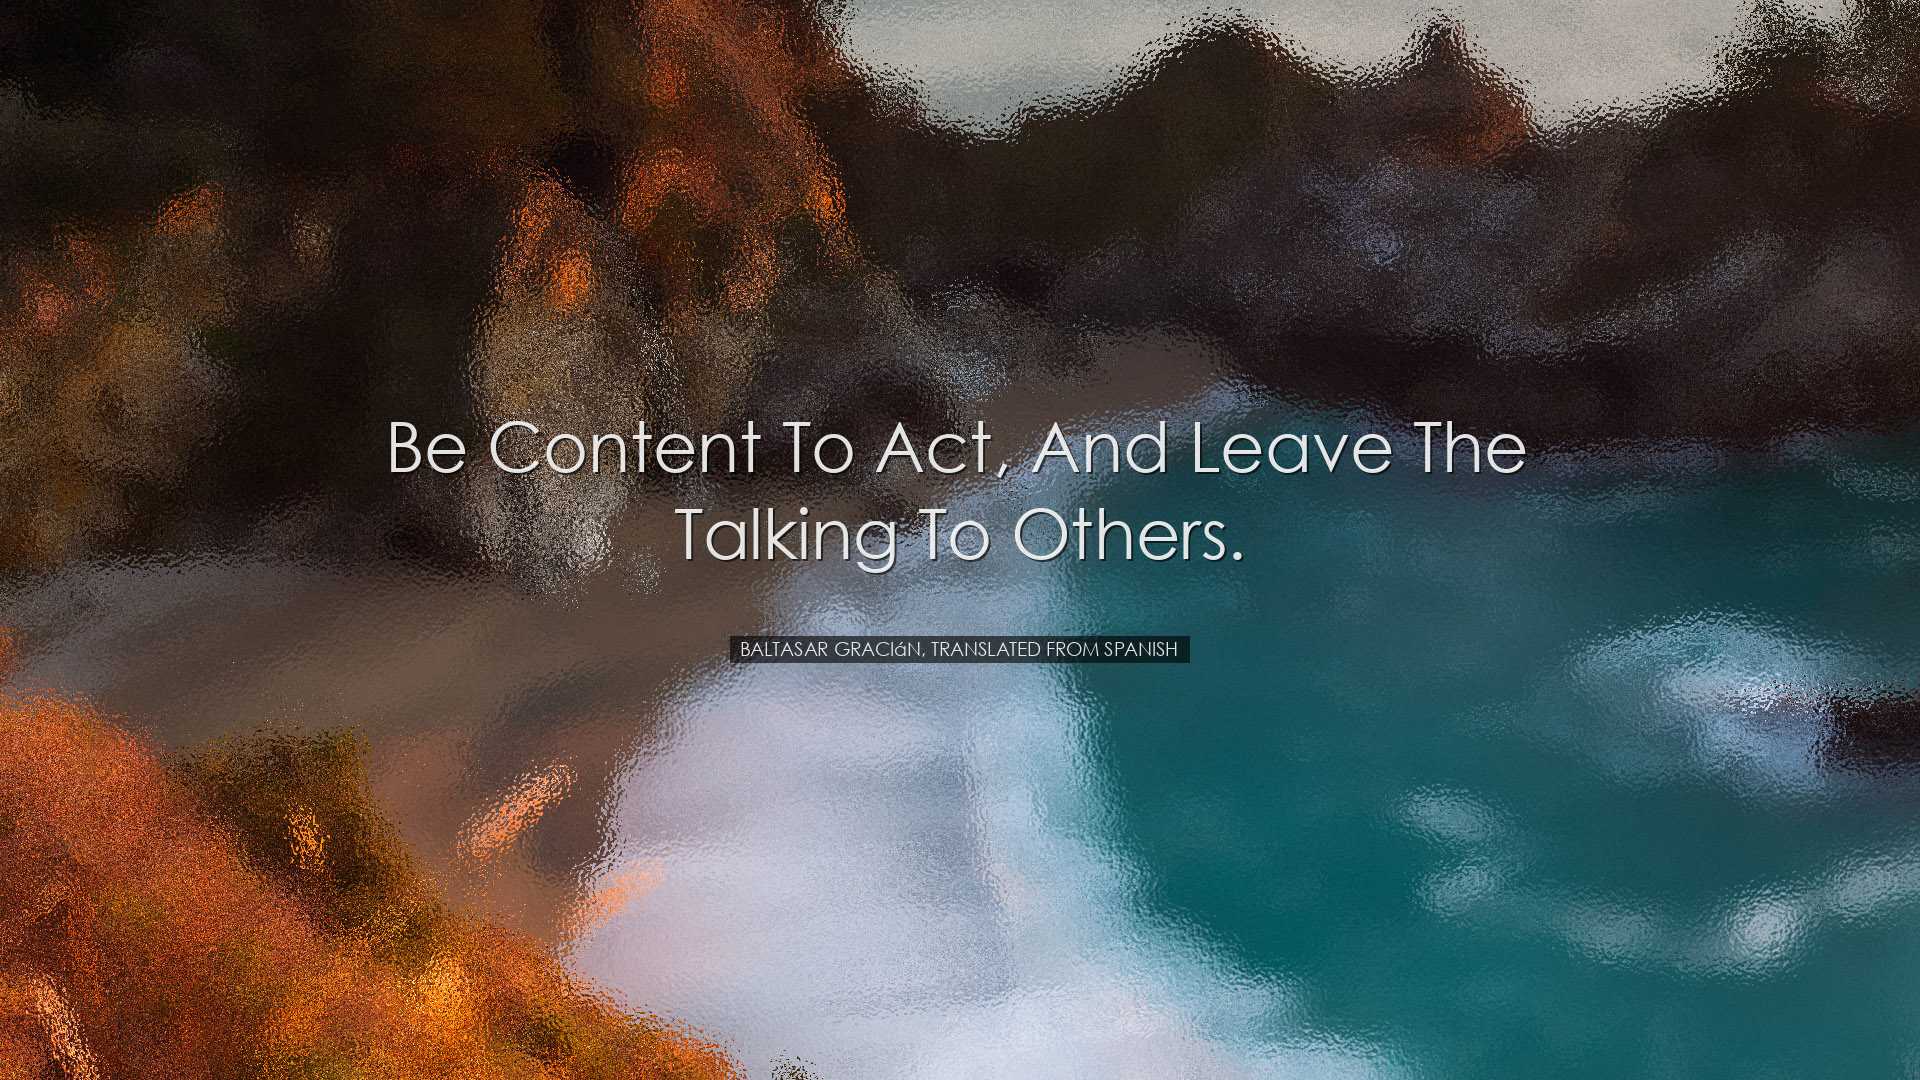 Be content to act, and leave the talking to others. - Baltasar Gra